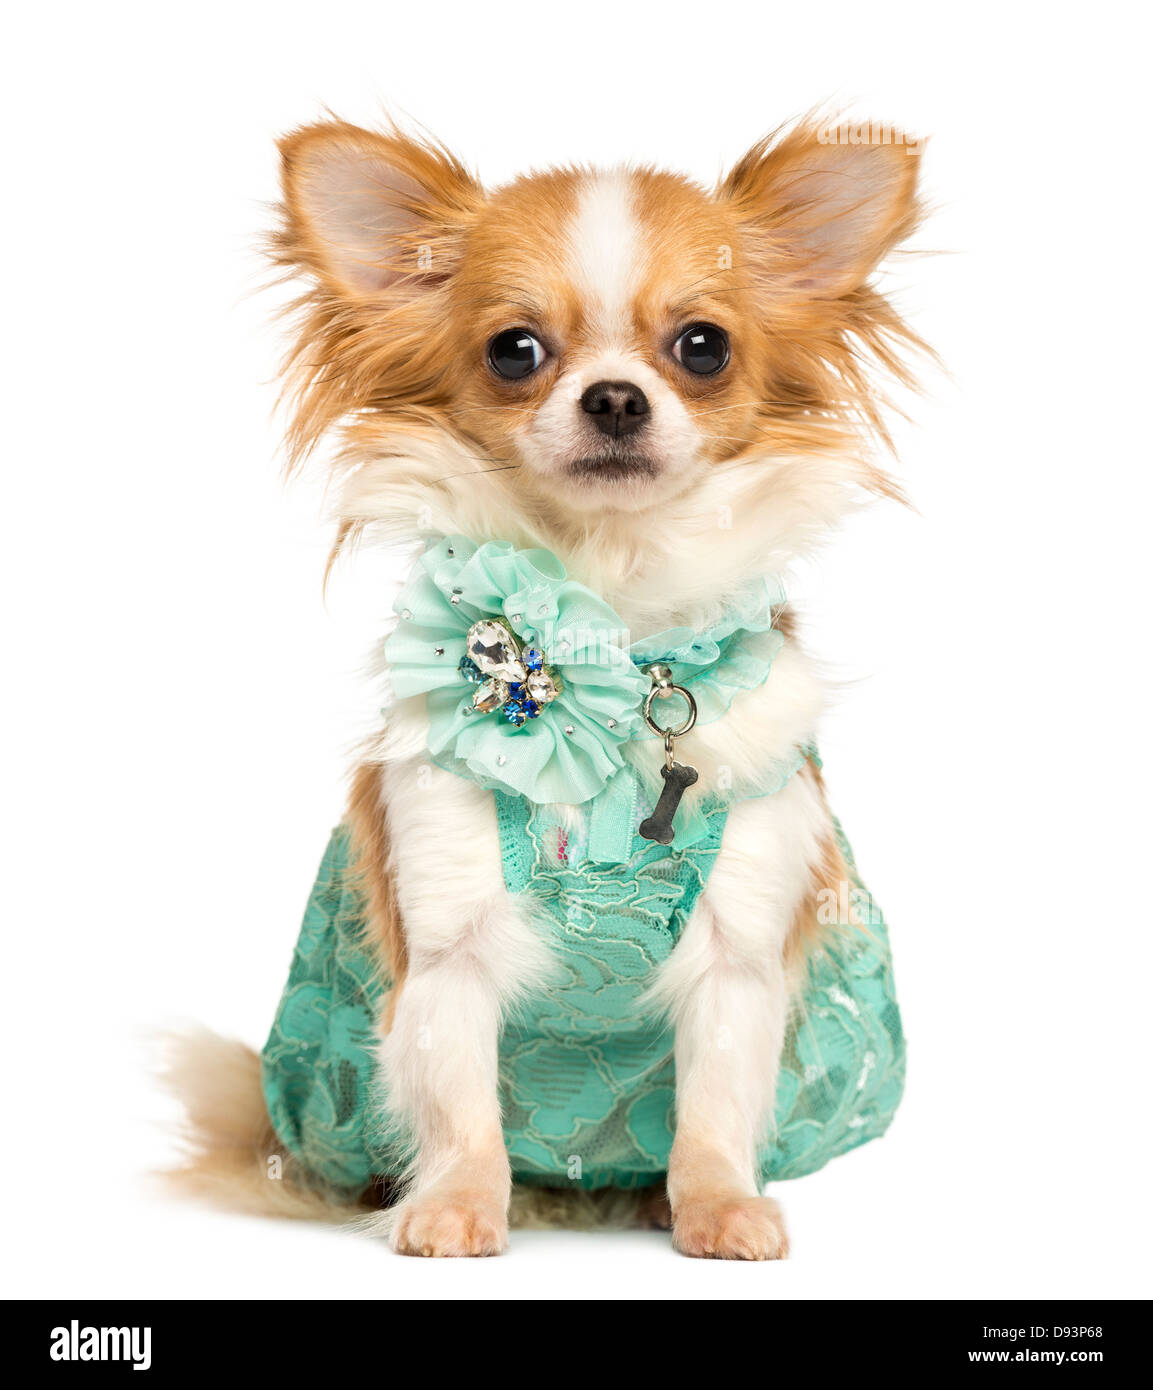 Chihuahua wearing a green dress sitting against white background Stock Photo